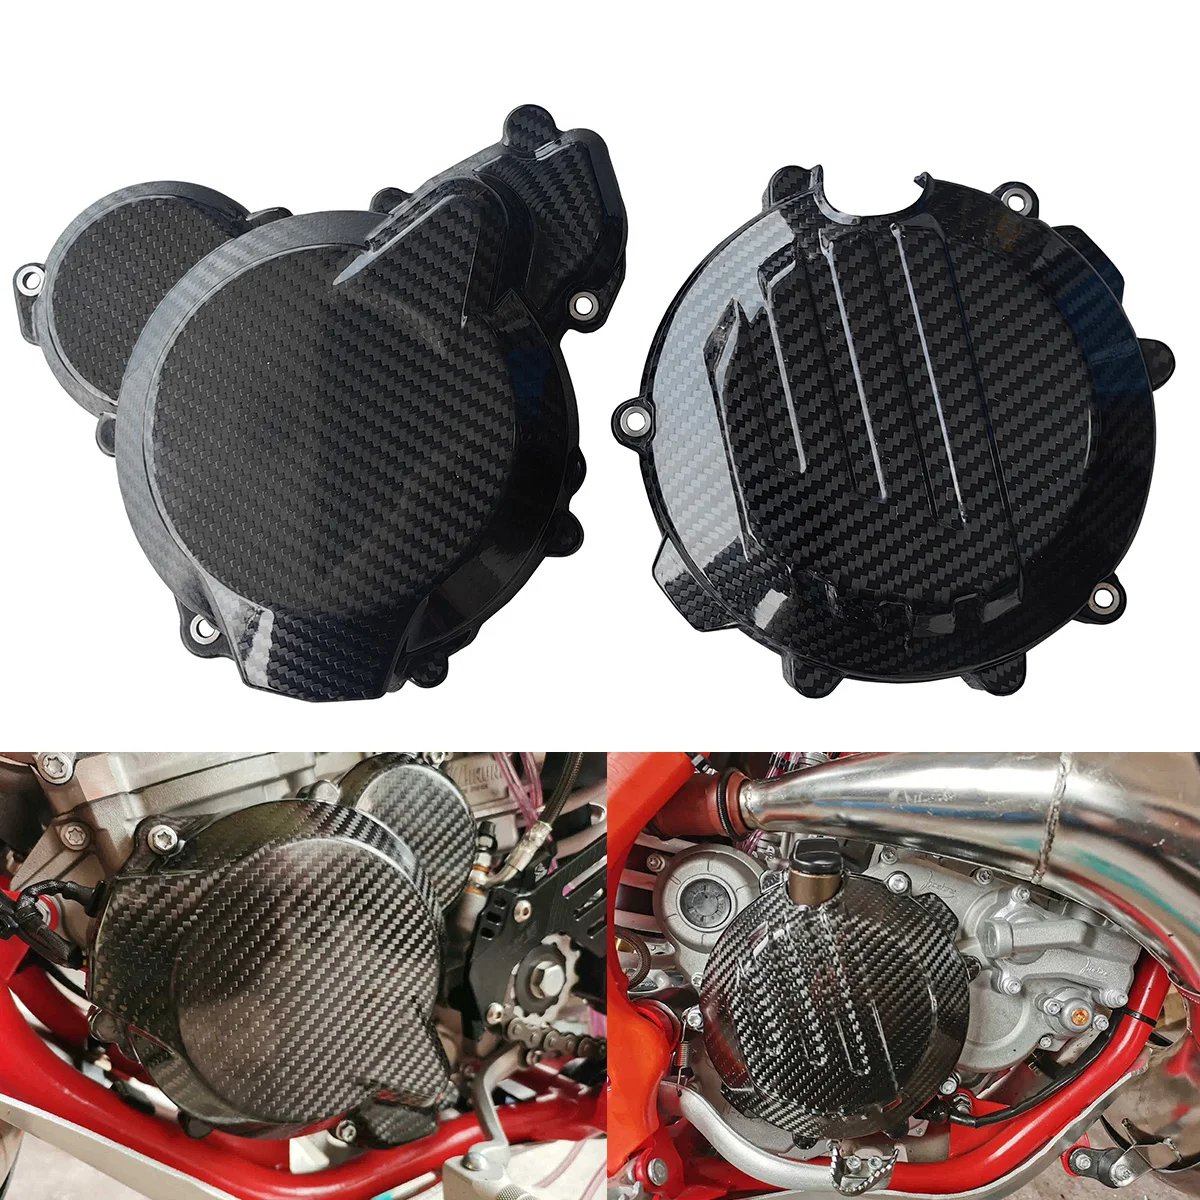 

Motorcycle Carbon Fibre Engine Clutch Guard Ignition Protector For KTM SX EXC XC XCW TPI 250 300 Husqvarna TC TX TE 250i 300i